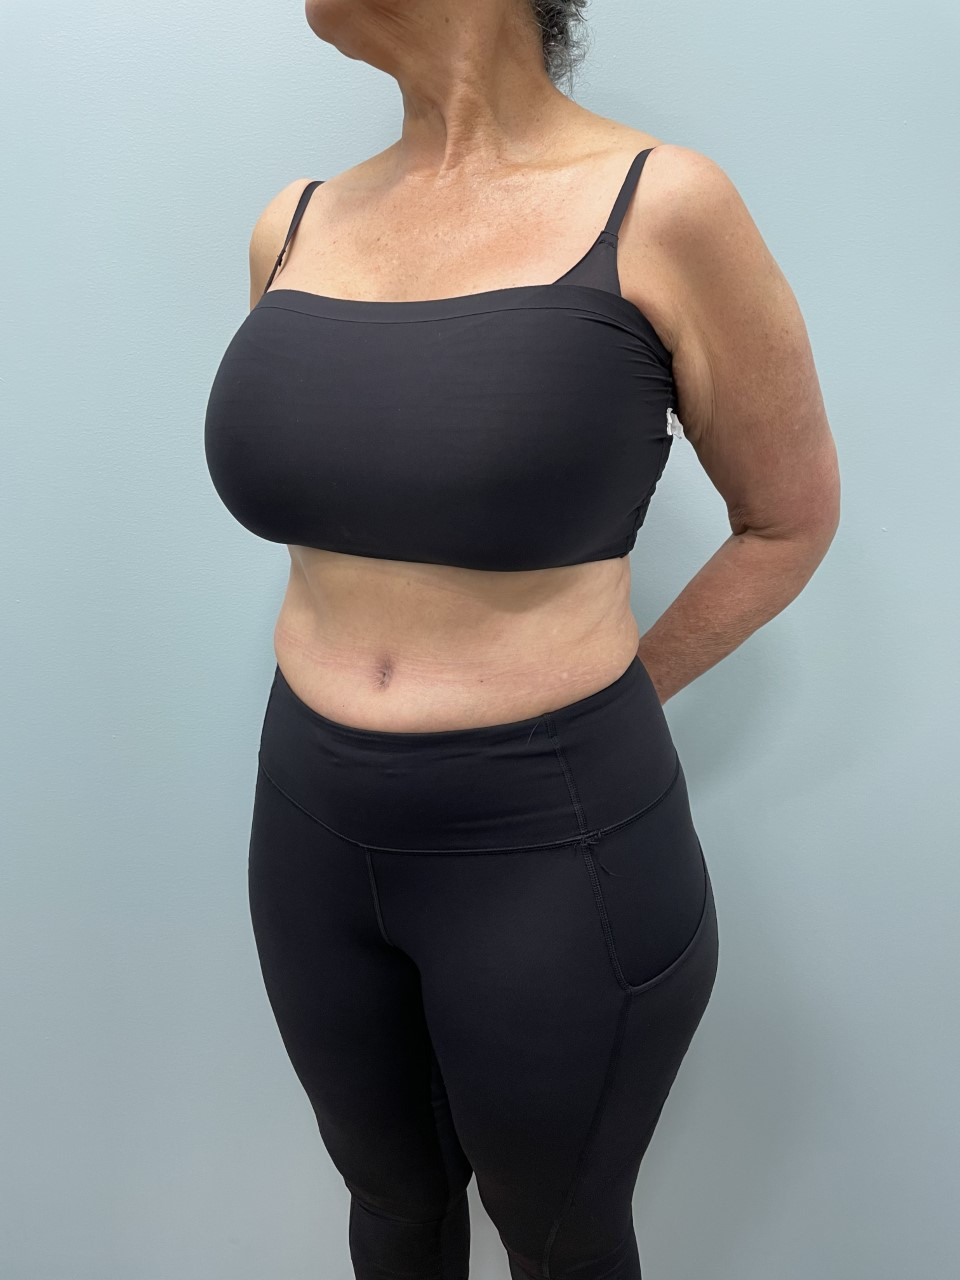 Tummy Tuck Patient Photo - Case 3686 - after view